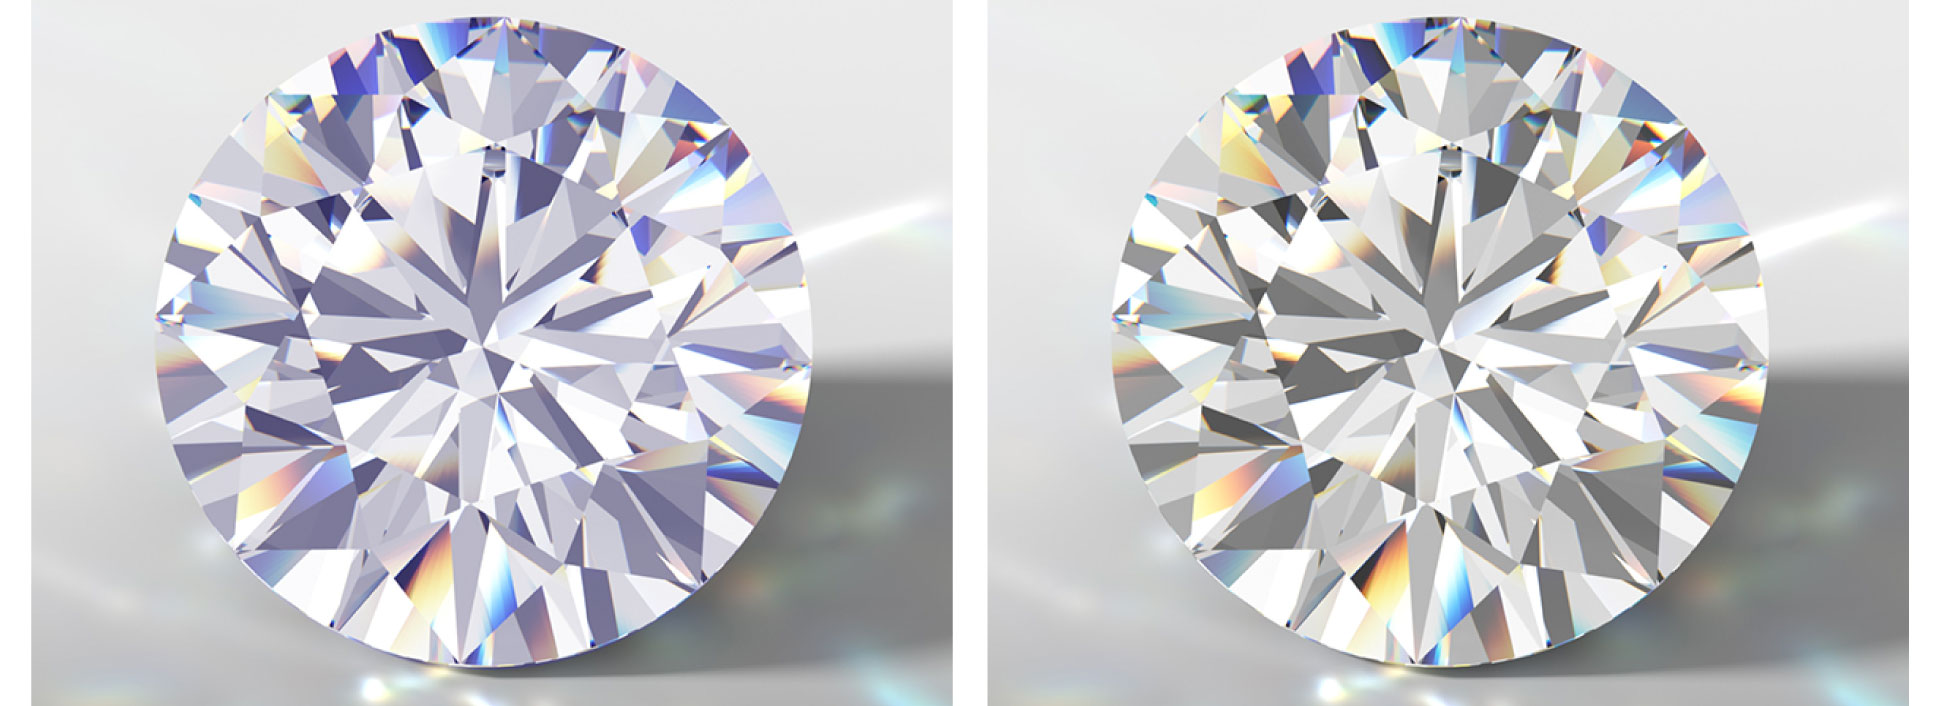 What You Need to Know About Diamond Fluorescence - Brilliant Earth